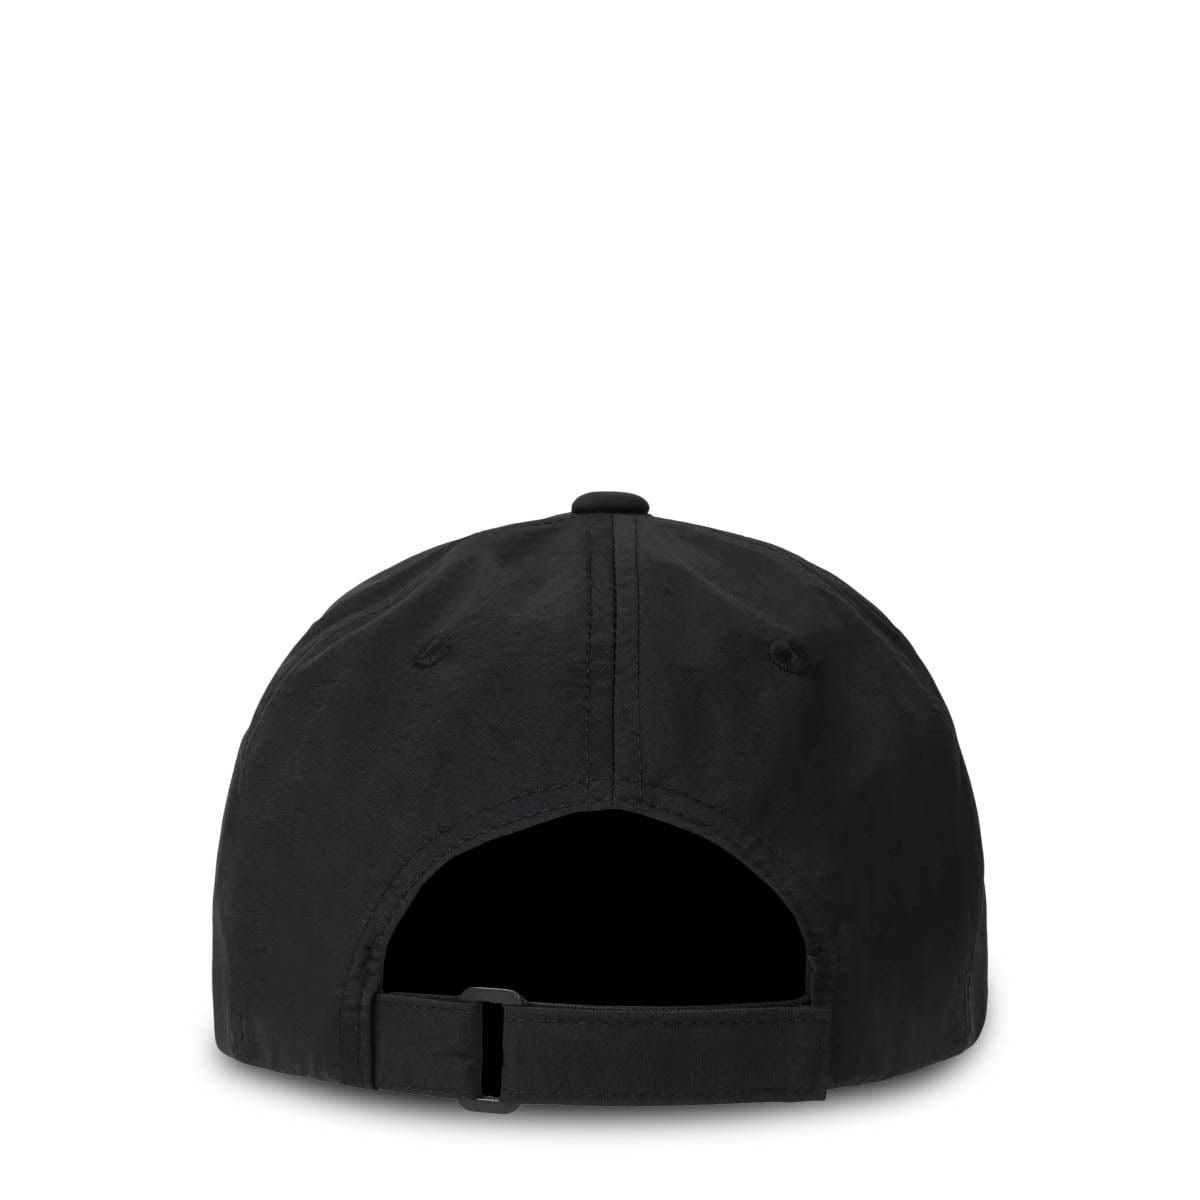 Real Bad Man Accessories - HATS - Snapback-Fitted Hat BLACK / O/S RBM 6 PANEL HAT